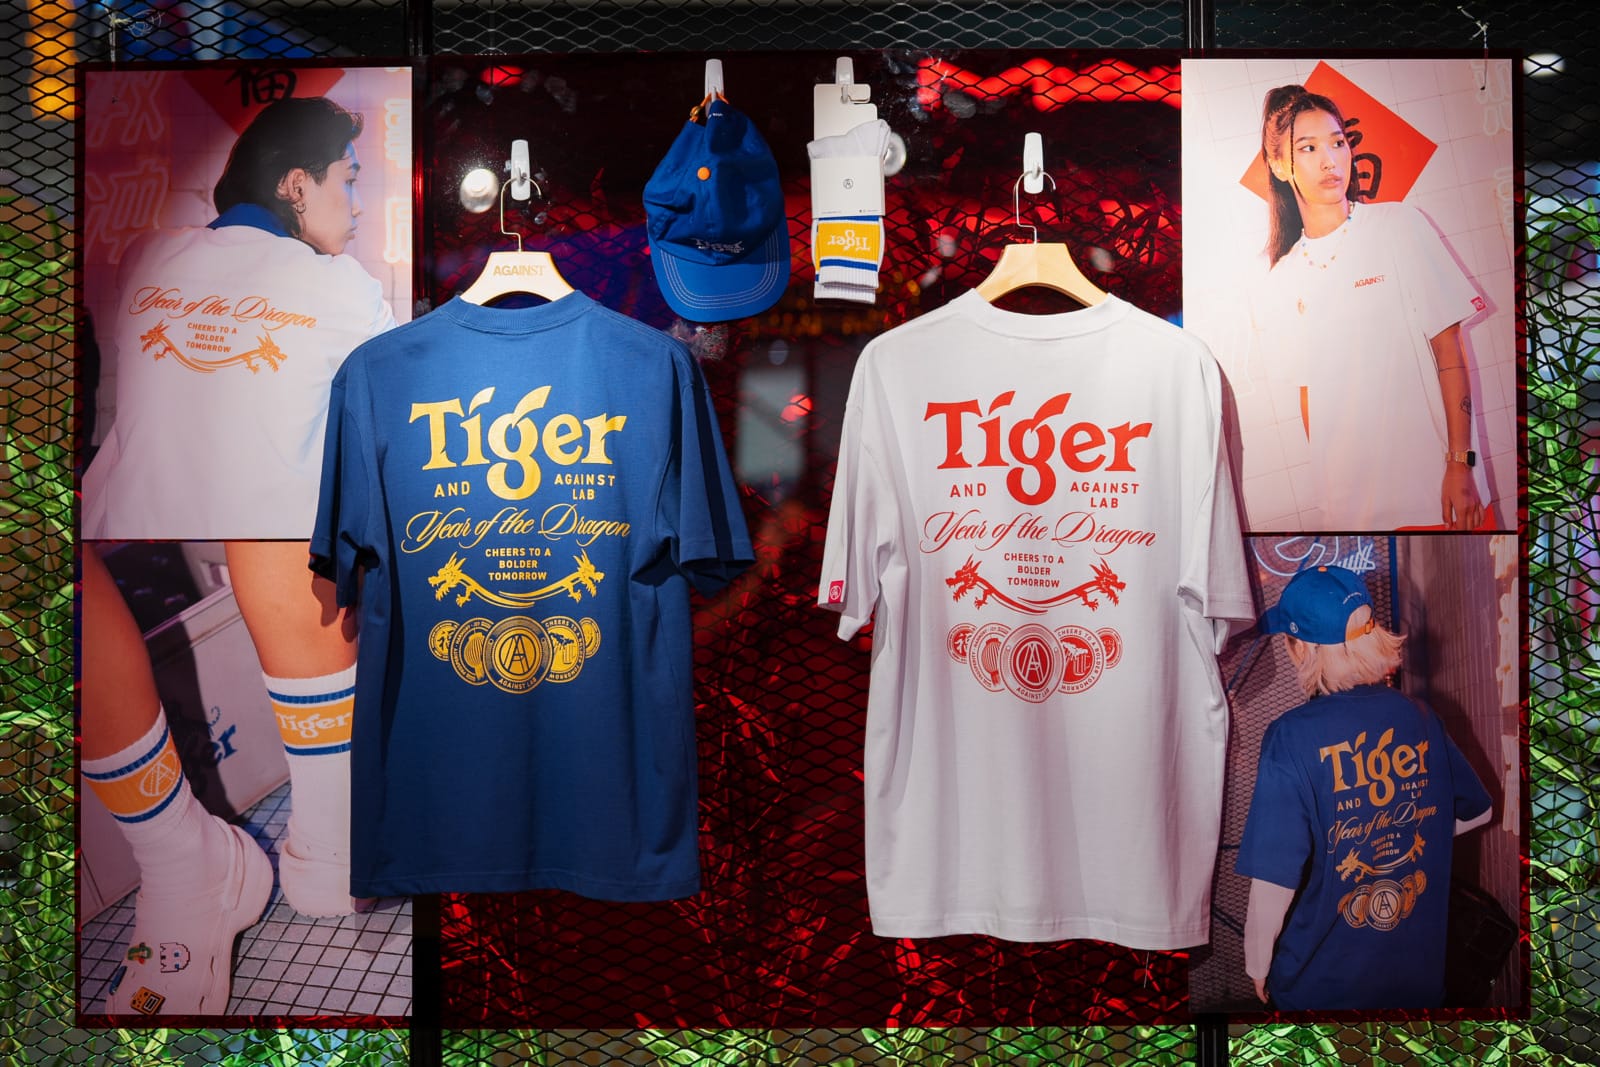 10. The Tiger X Against Lab booth at Sunway Velocity Mall KL